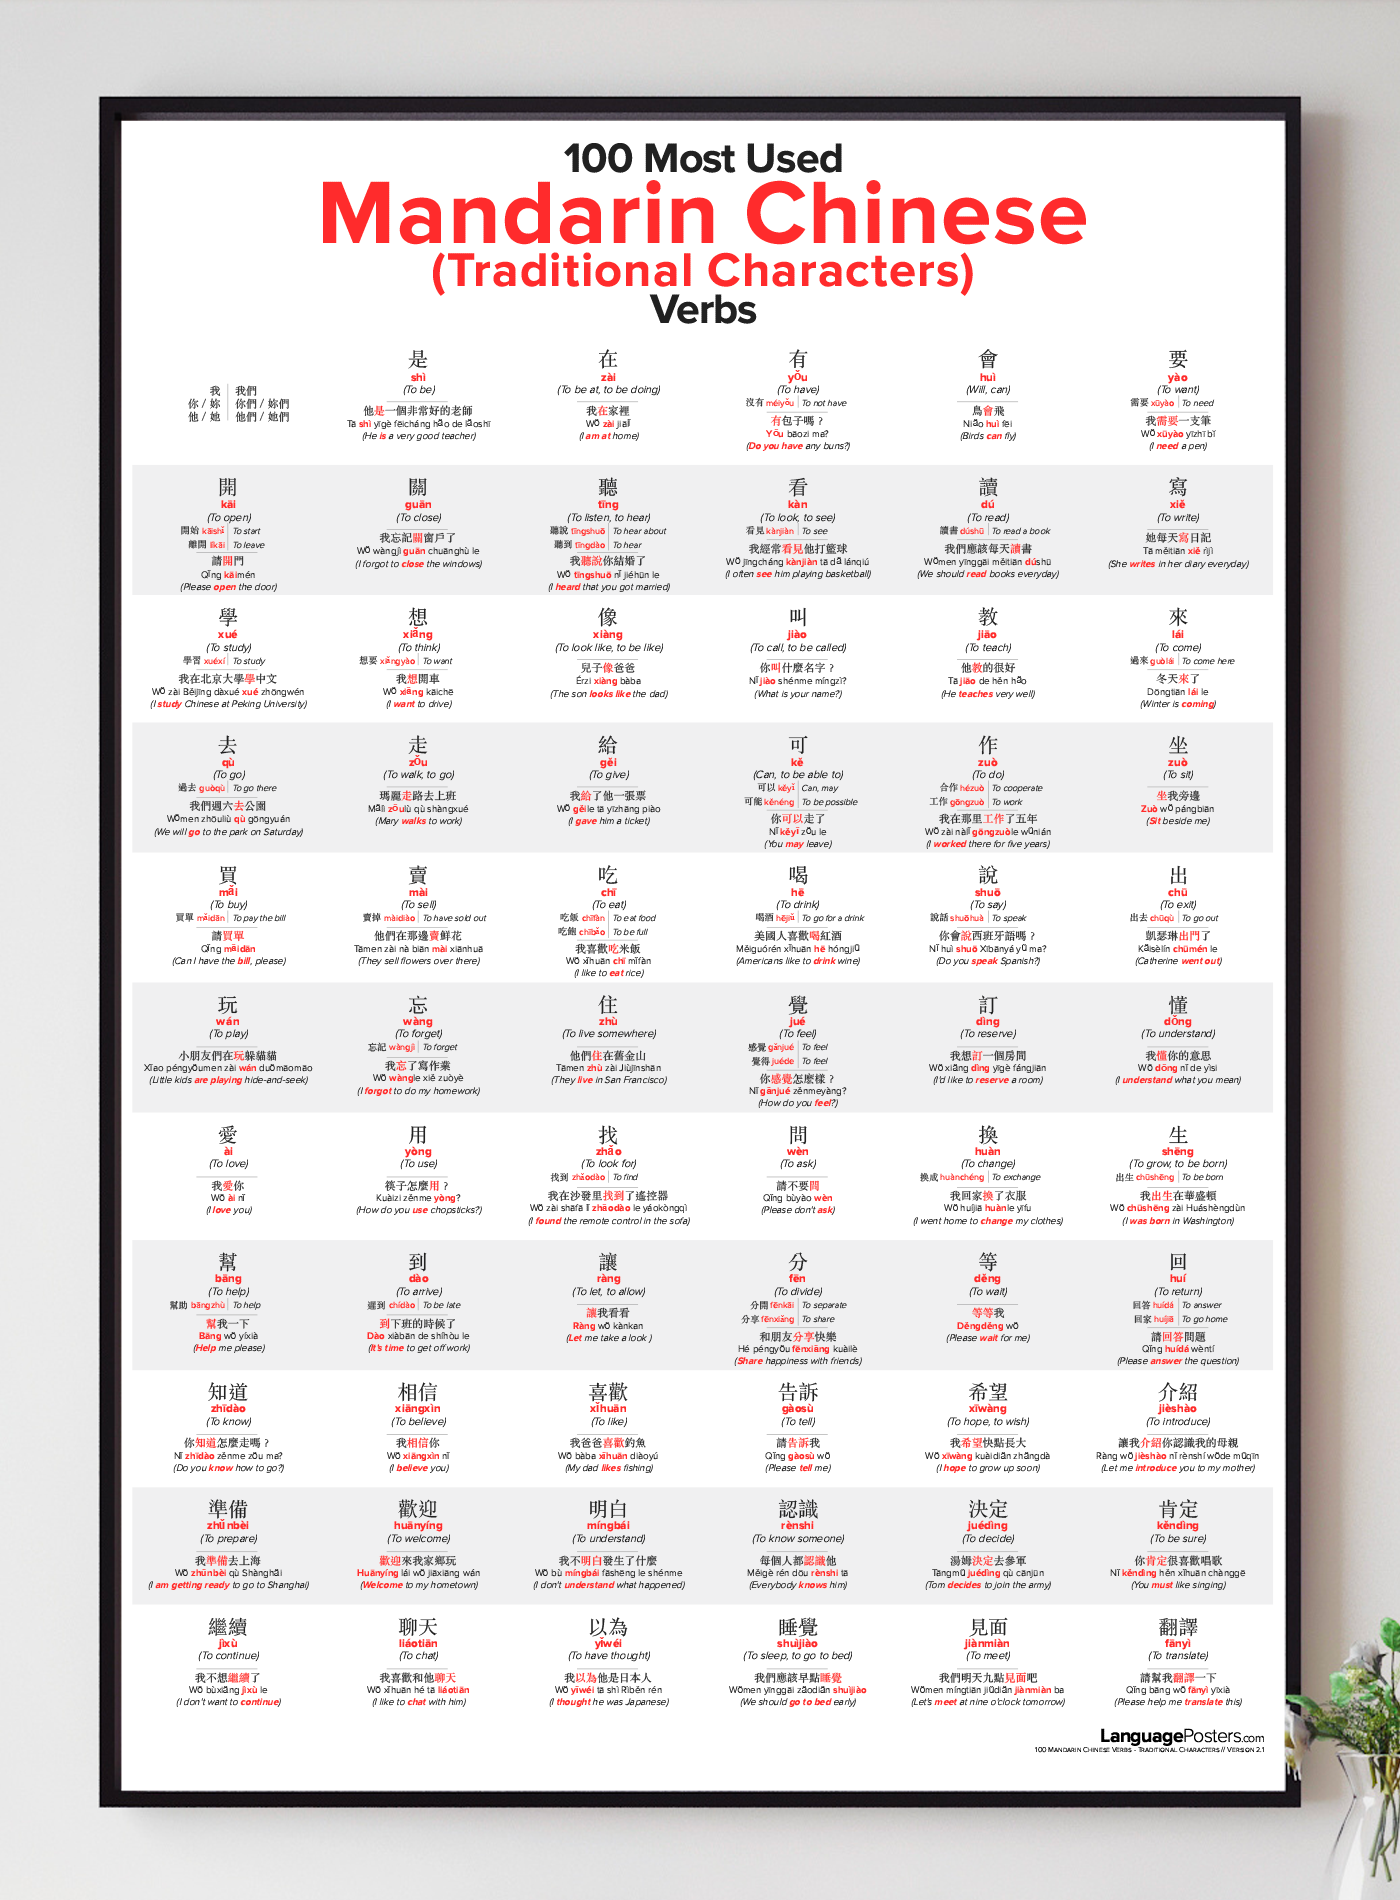 100 Most Used Mandarin Chinese Verbs Poster, Traditional Characters - LanguagePosters.com